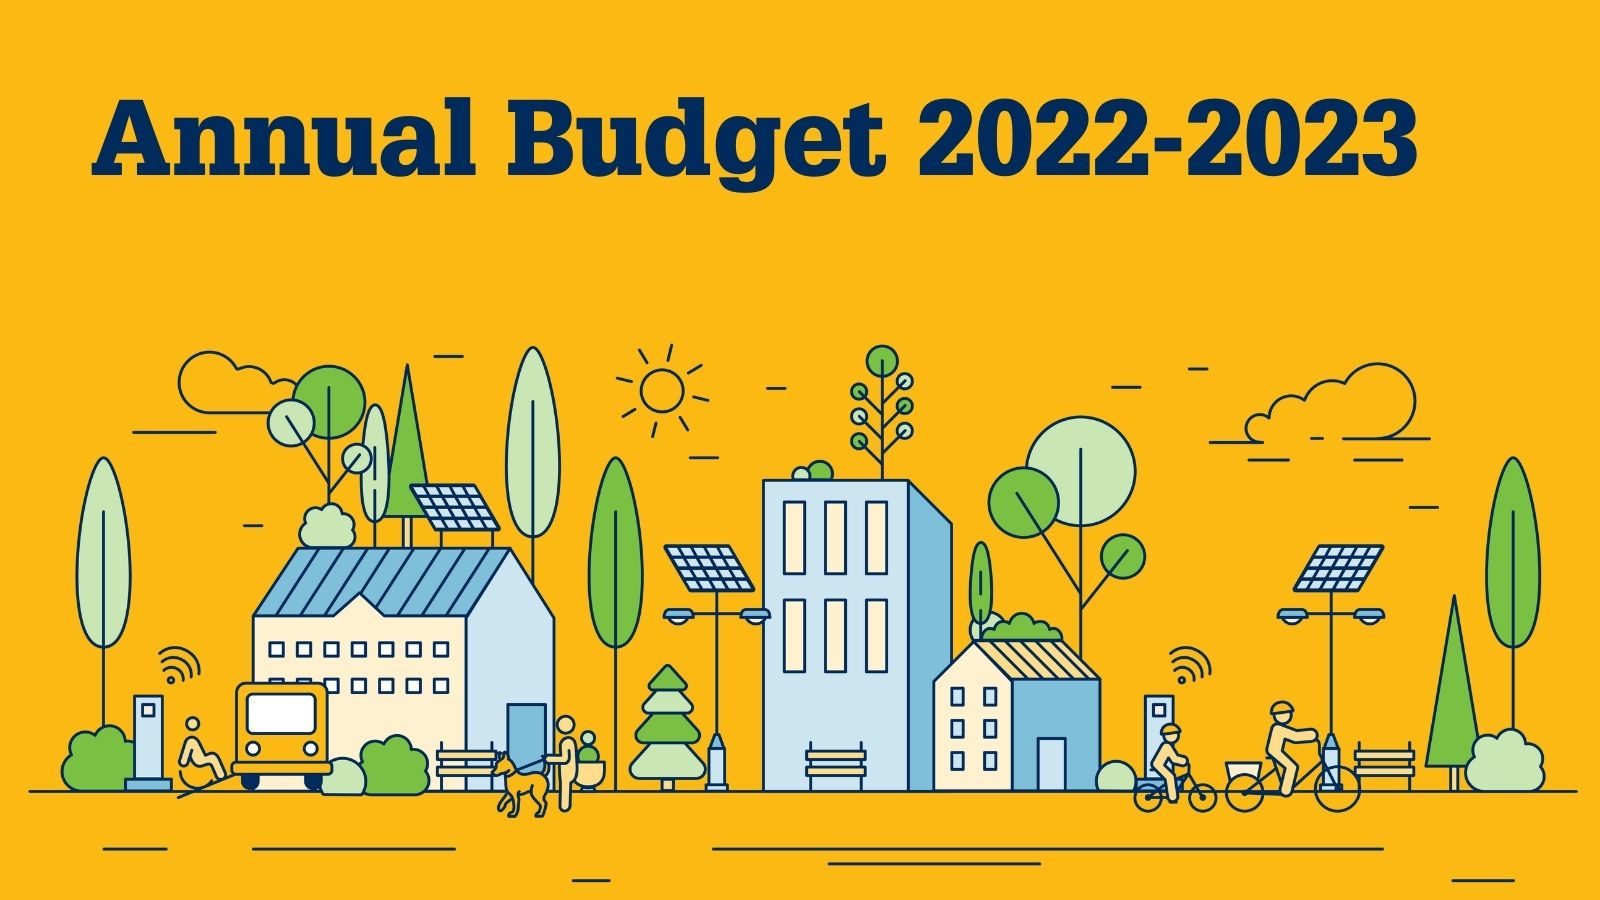 Annual Budget 2022-2023